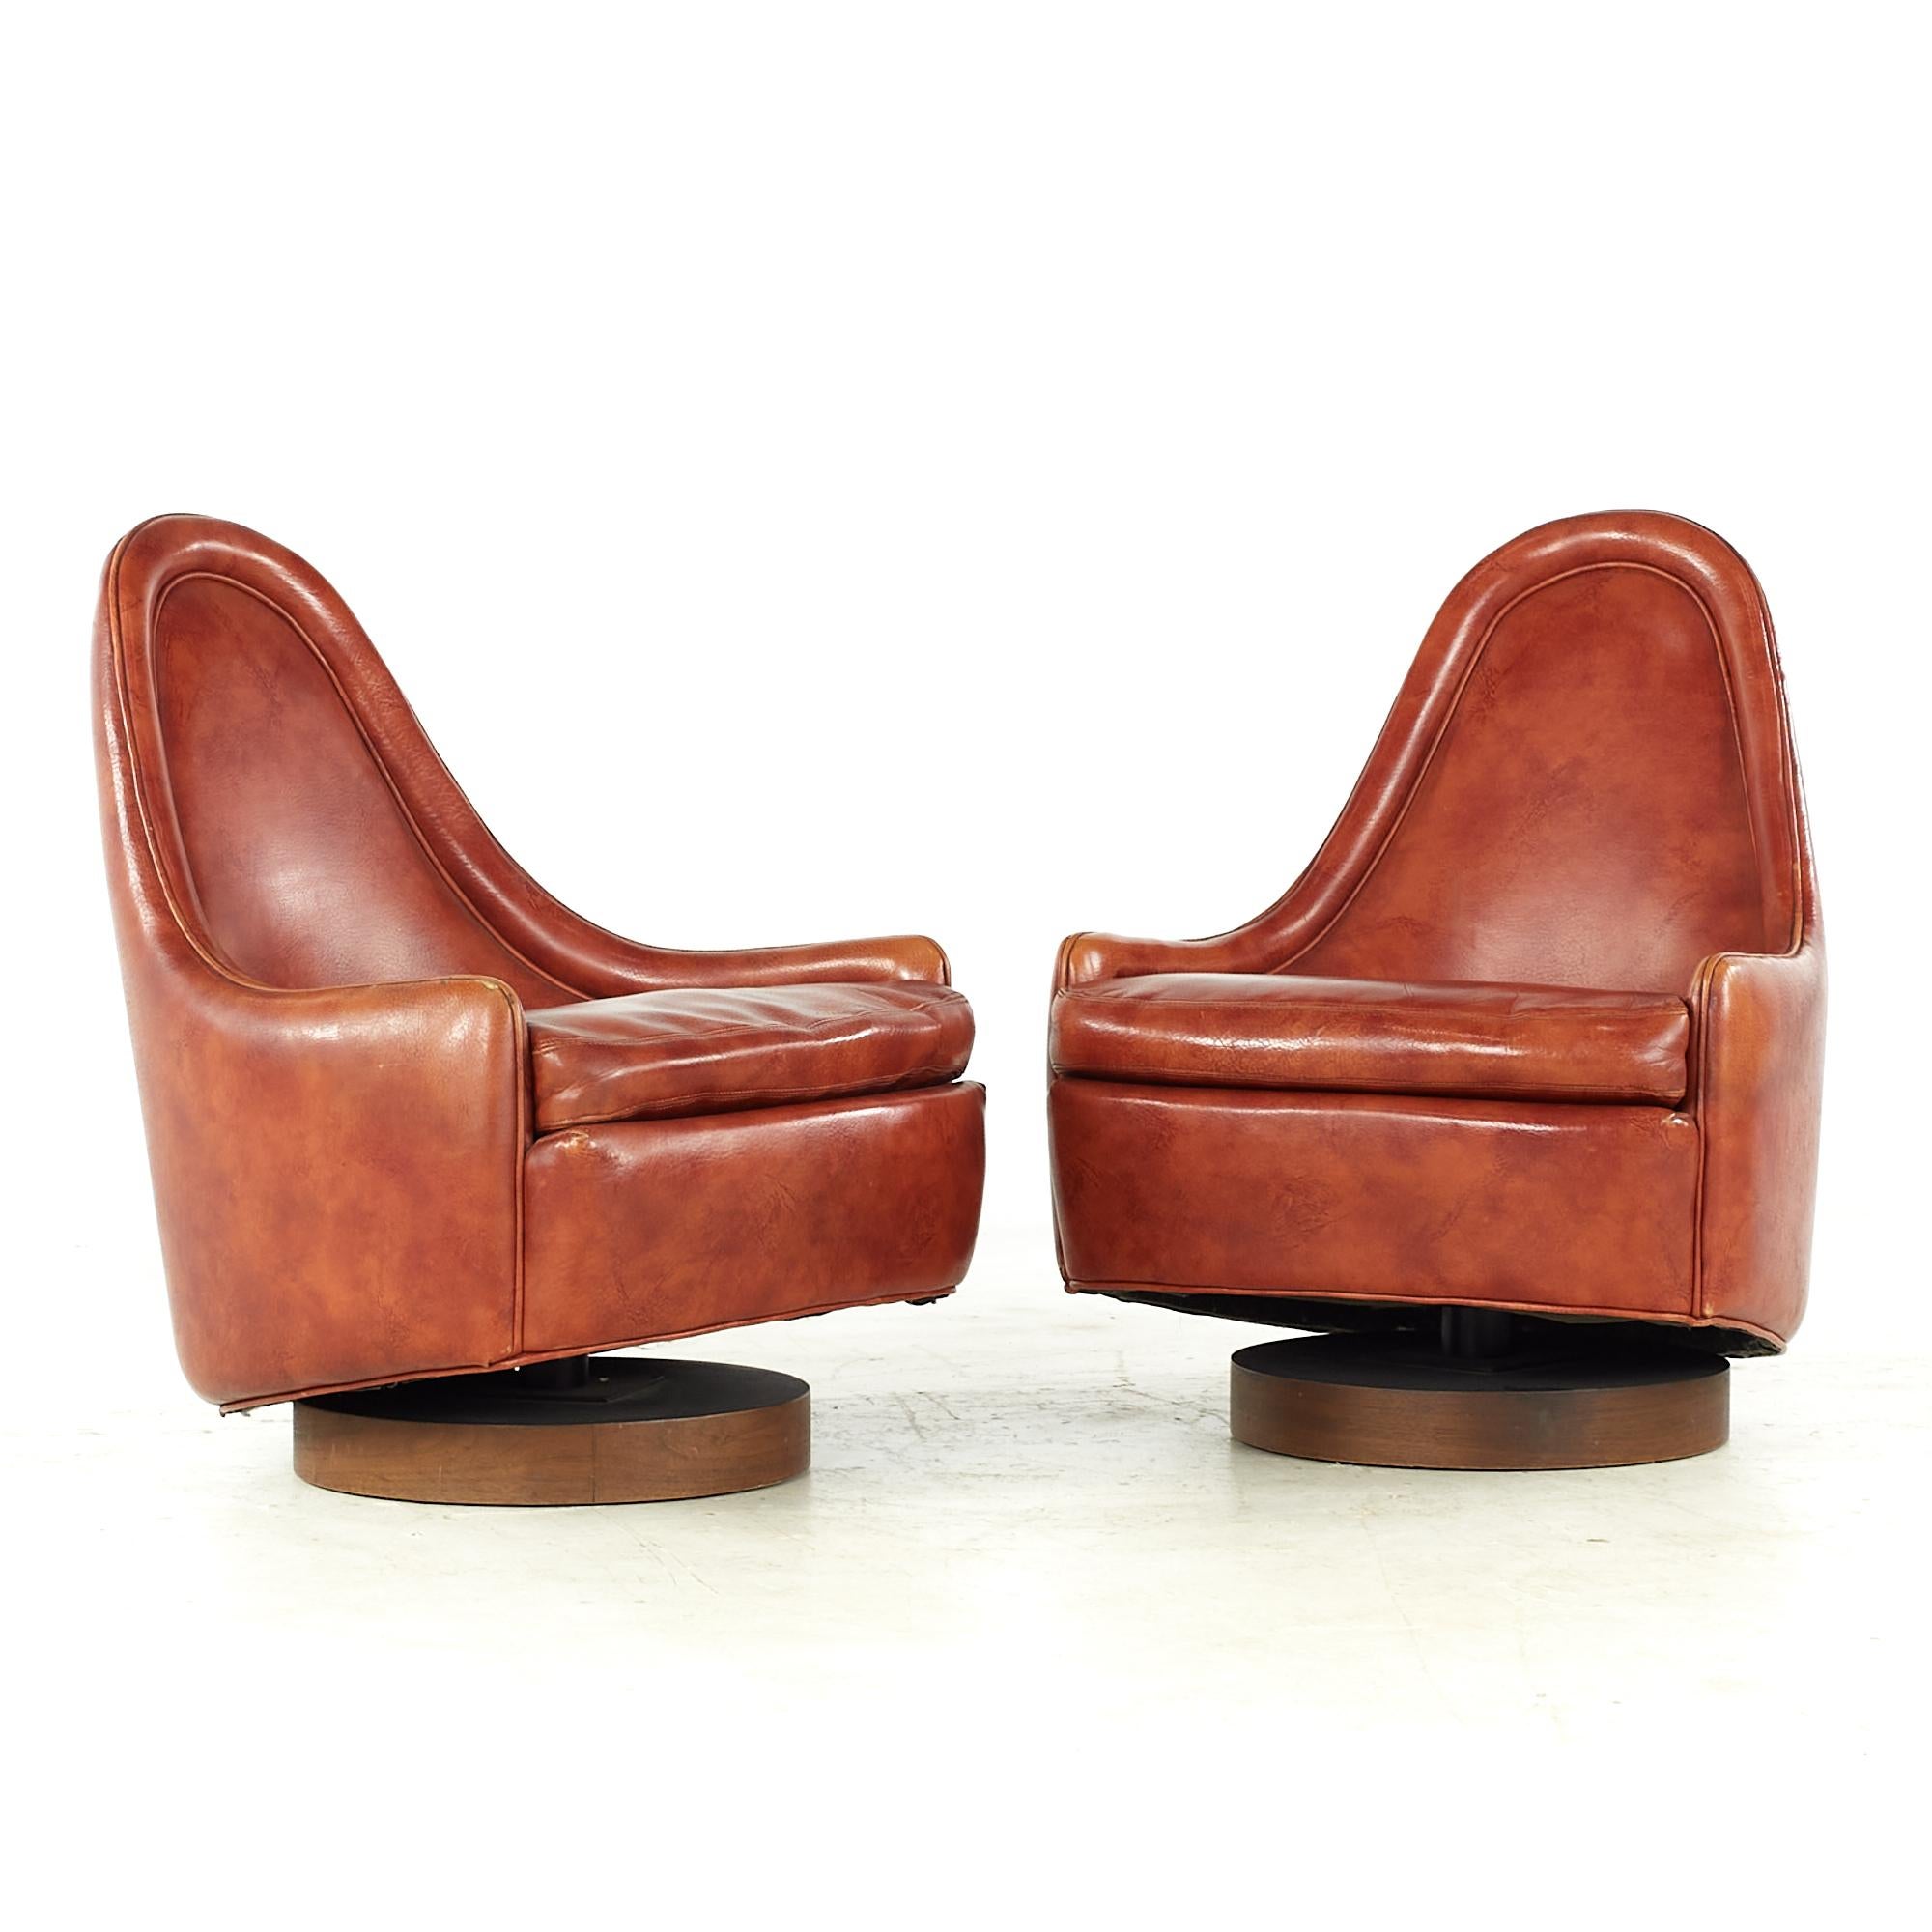 Milo Baughman for Thayer Coggin midcentury swivel lounge chair - pair

Each chair measures: 22.5 wide x 25 deep x 28 high, with a seat height of 14 and arm height/chair clearance 15 inches

All pieces of furniture can be had in what we call